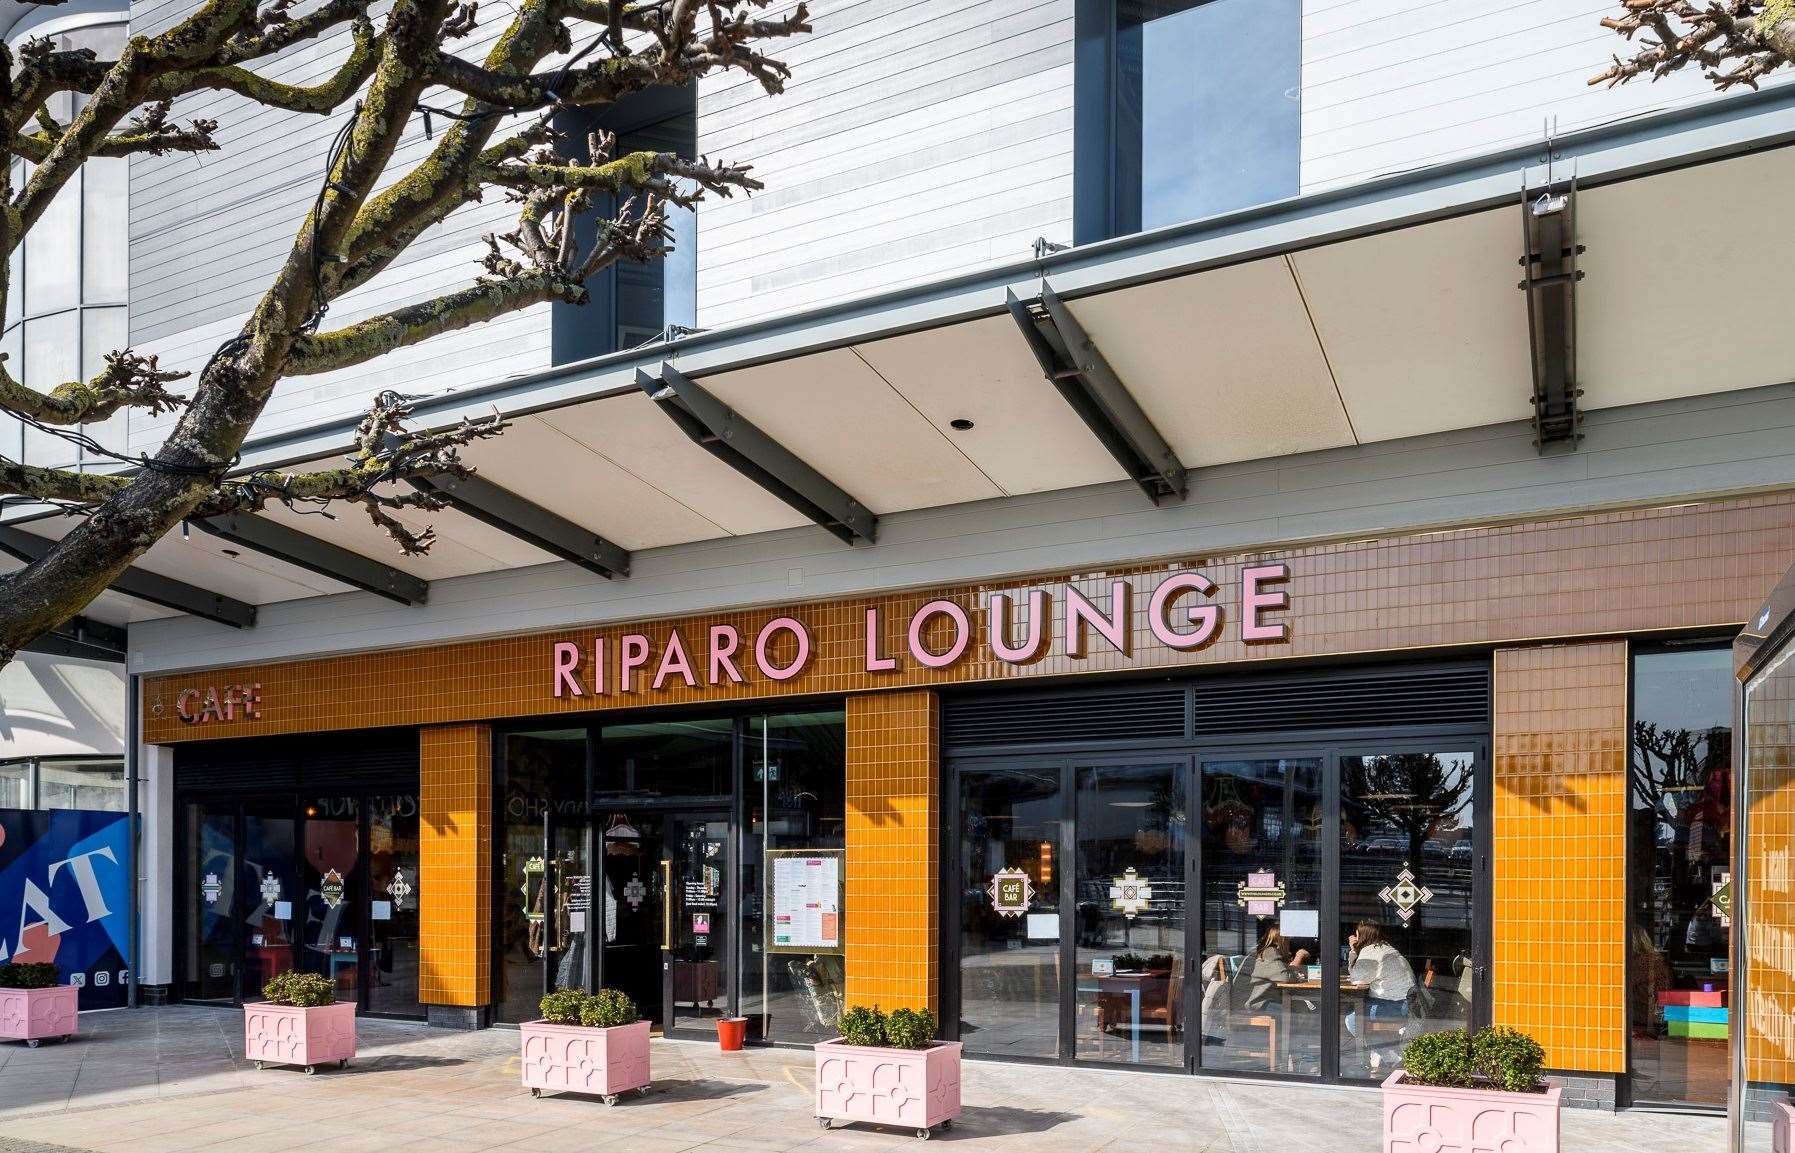 Riparo Lounge has moved into the former Debenhams building at Westwood Cross shopping centre. Picture: Loungers